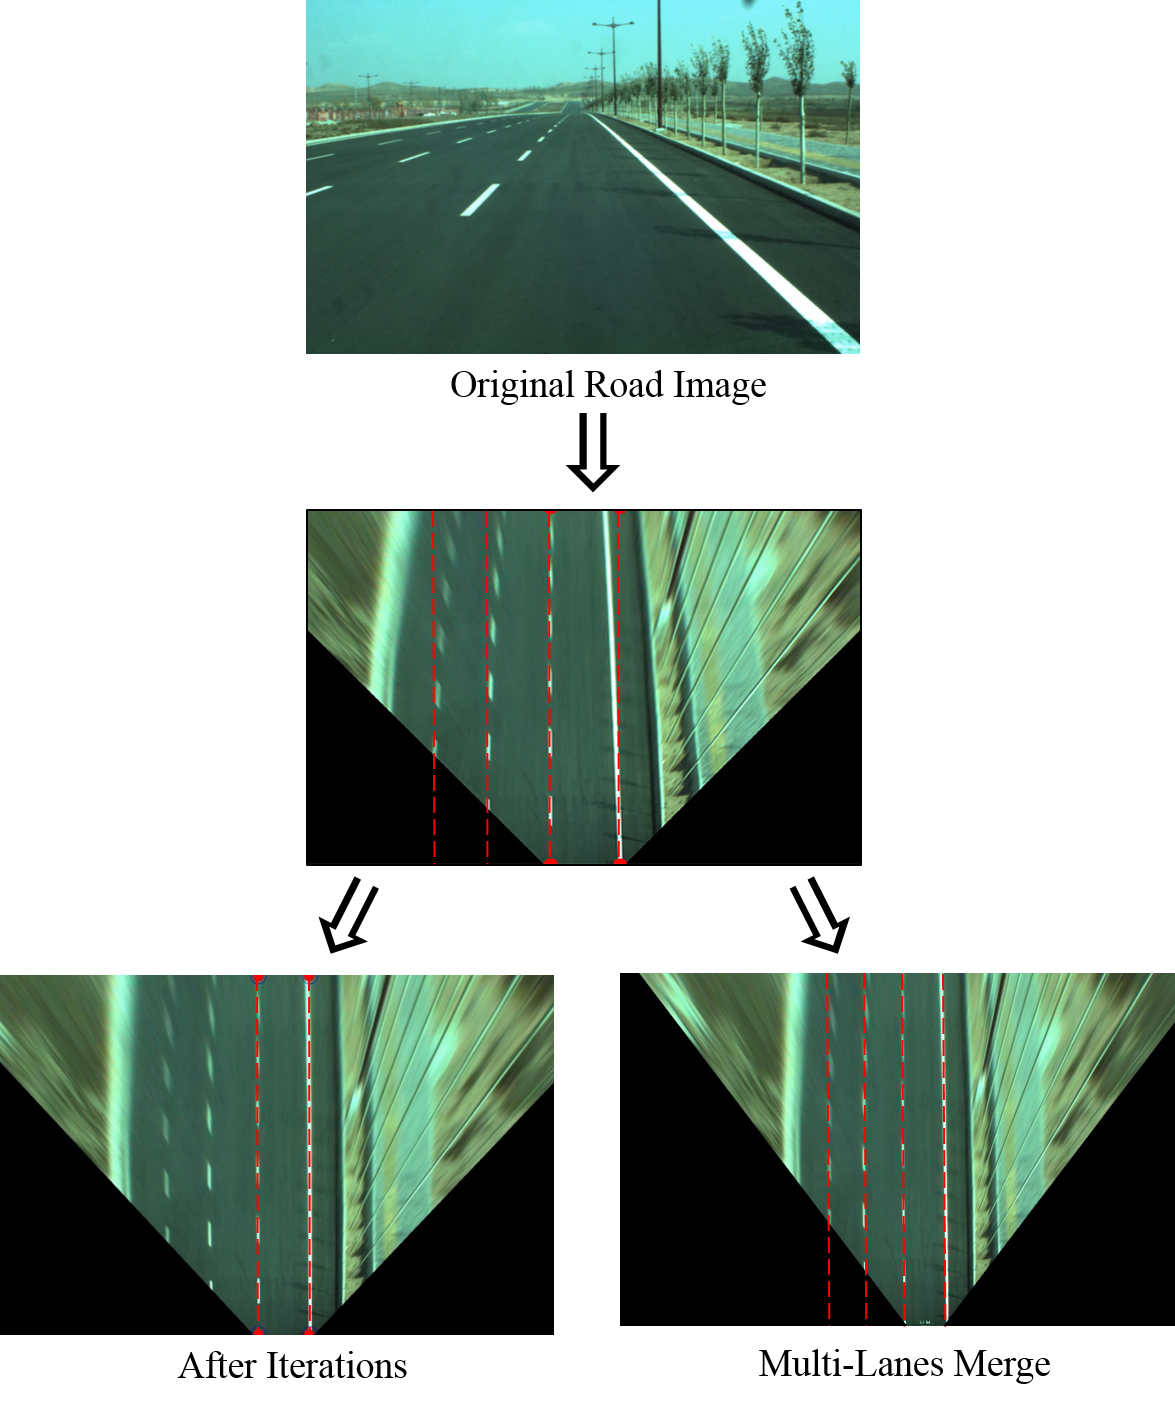 Birdeye An Automatic Method For Inverse Perspective Transformation Of Road Image Without Calibration Chen Shangyu